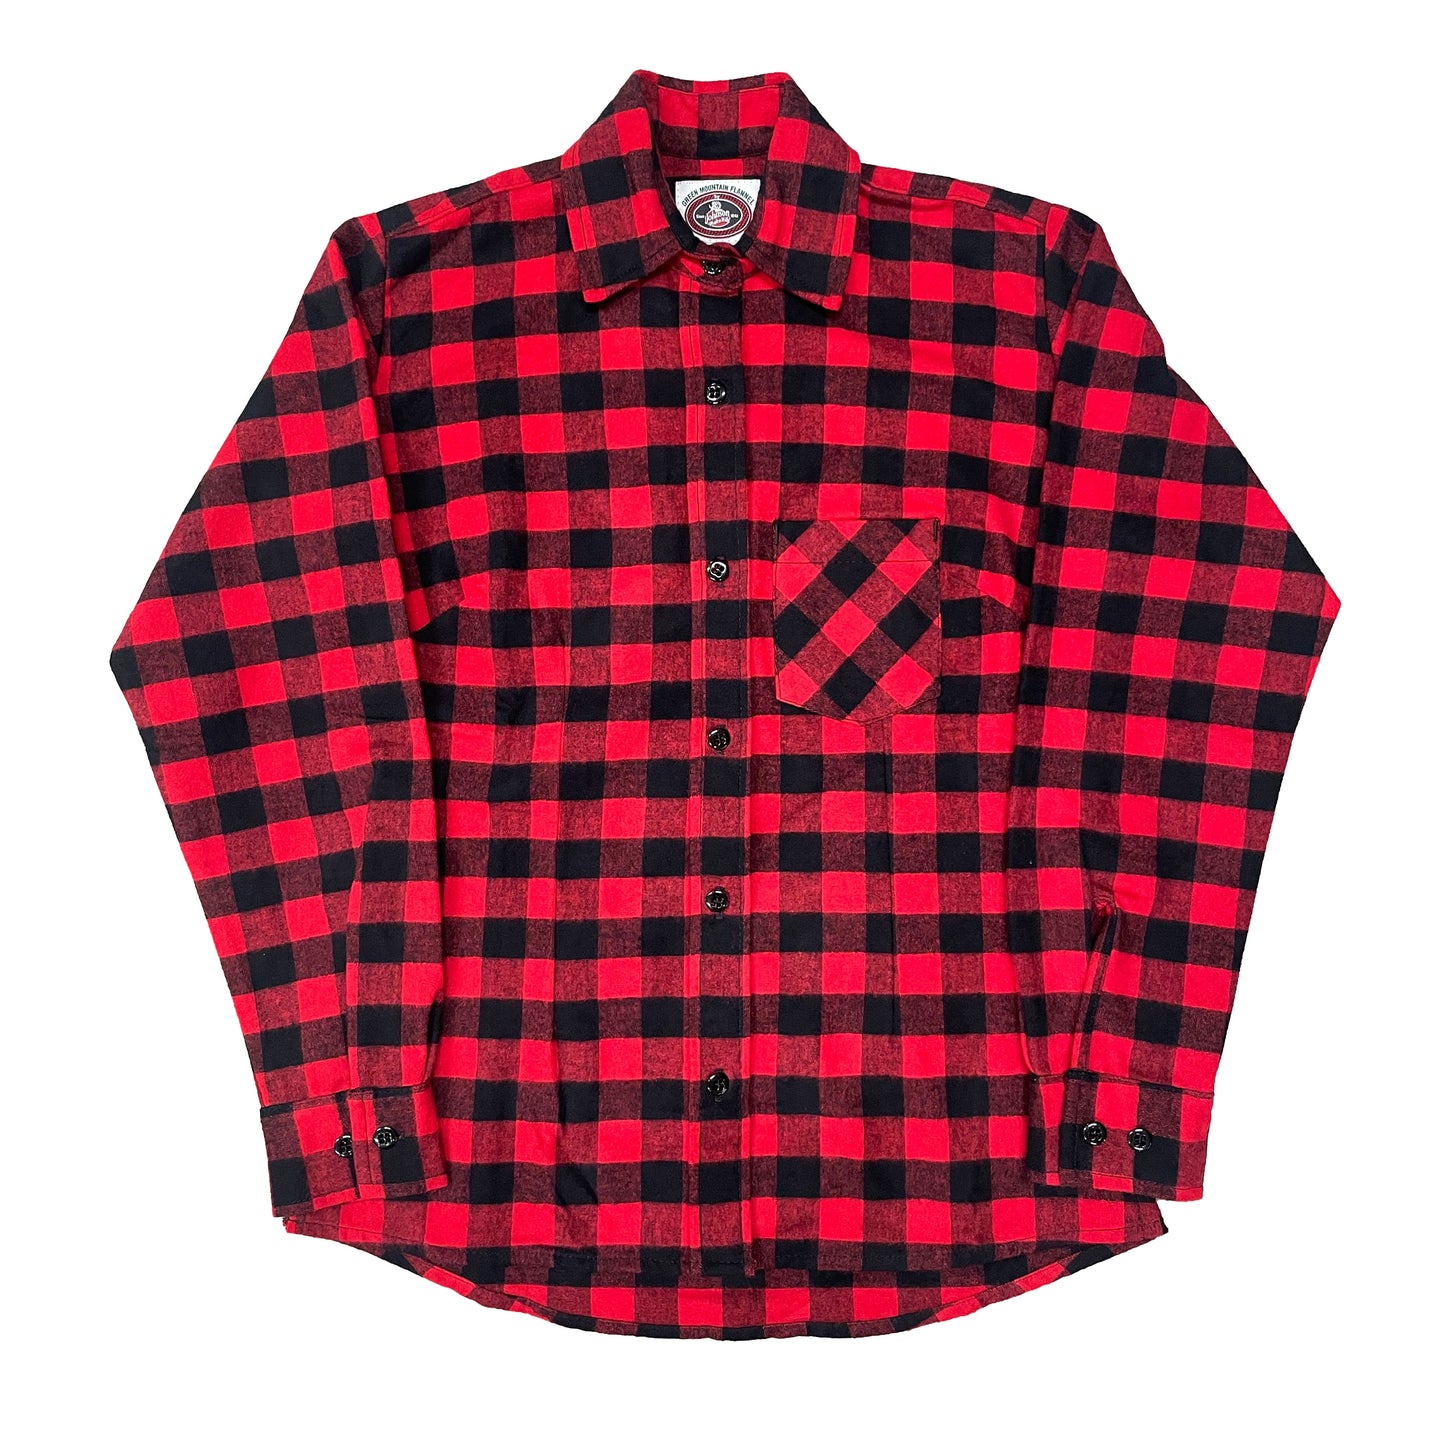 Green Mountain Flannel Women's long sleeve button down shirt with 1 chest pocket, long tail and button cuffs. Shown in red and black buffalo plaid plaid.